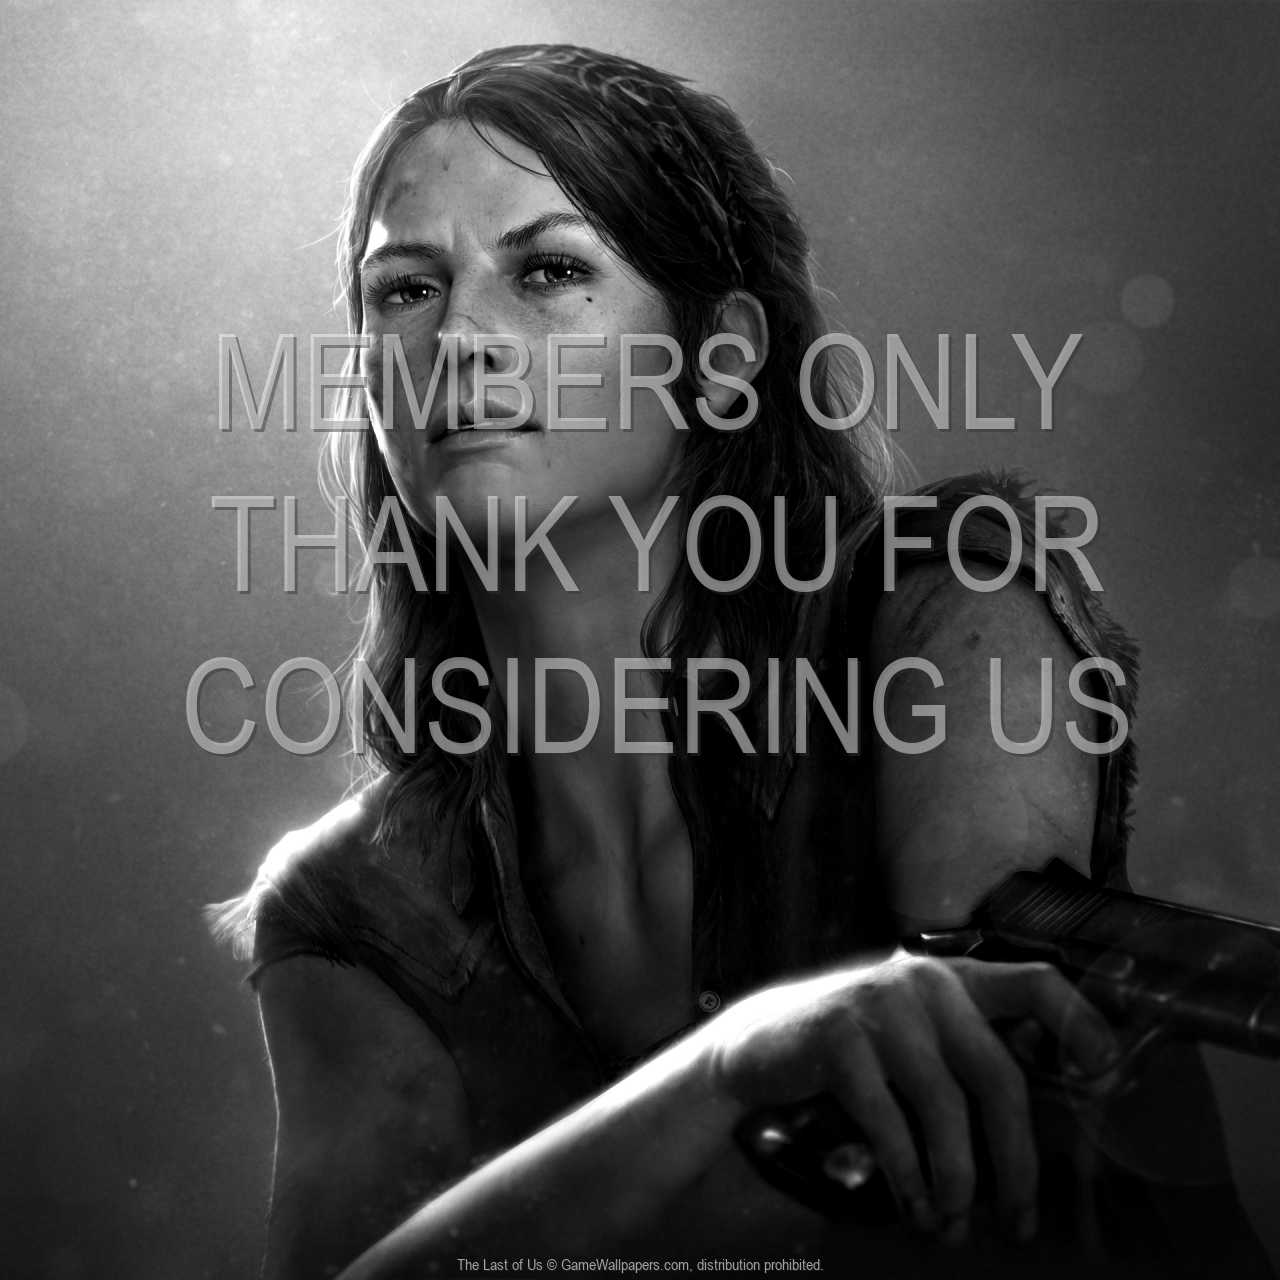 The Last of Us 720p Horizontal Mobile wallpaper or background 14